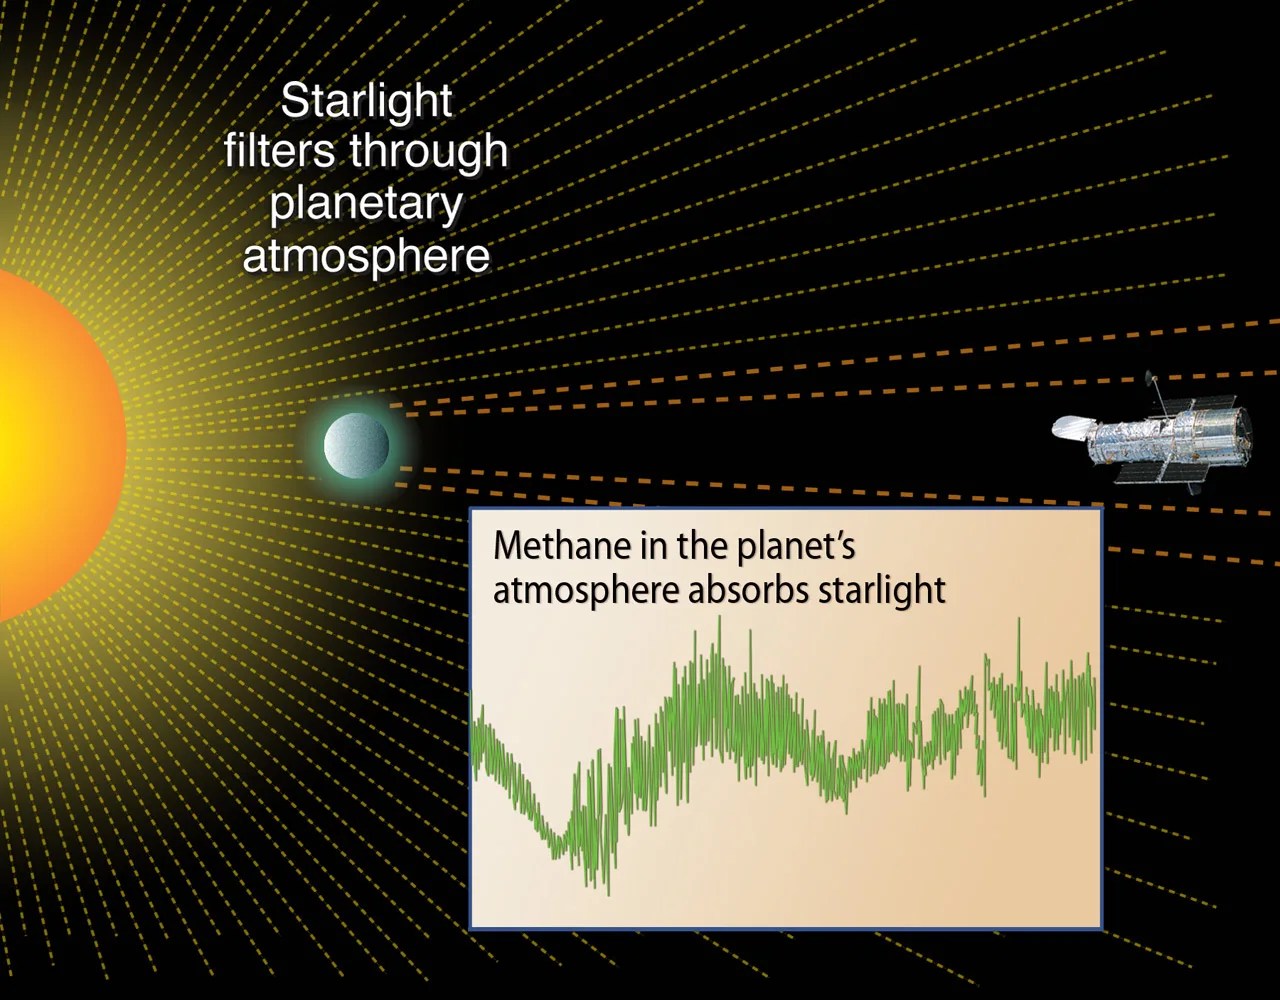 Methane in the atmosphere of extrasolar planet 189733b